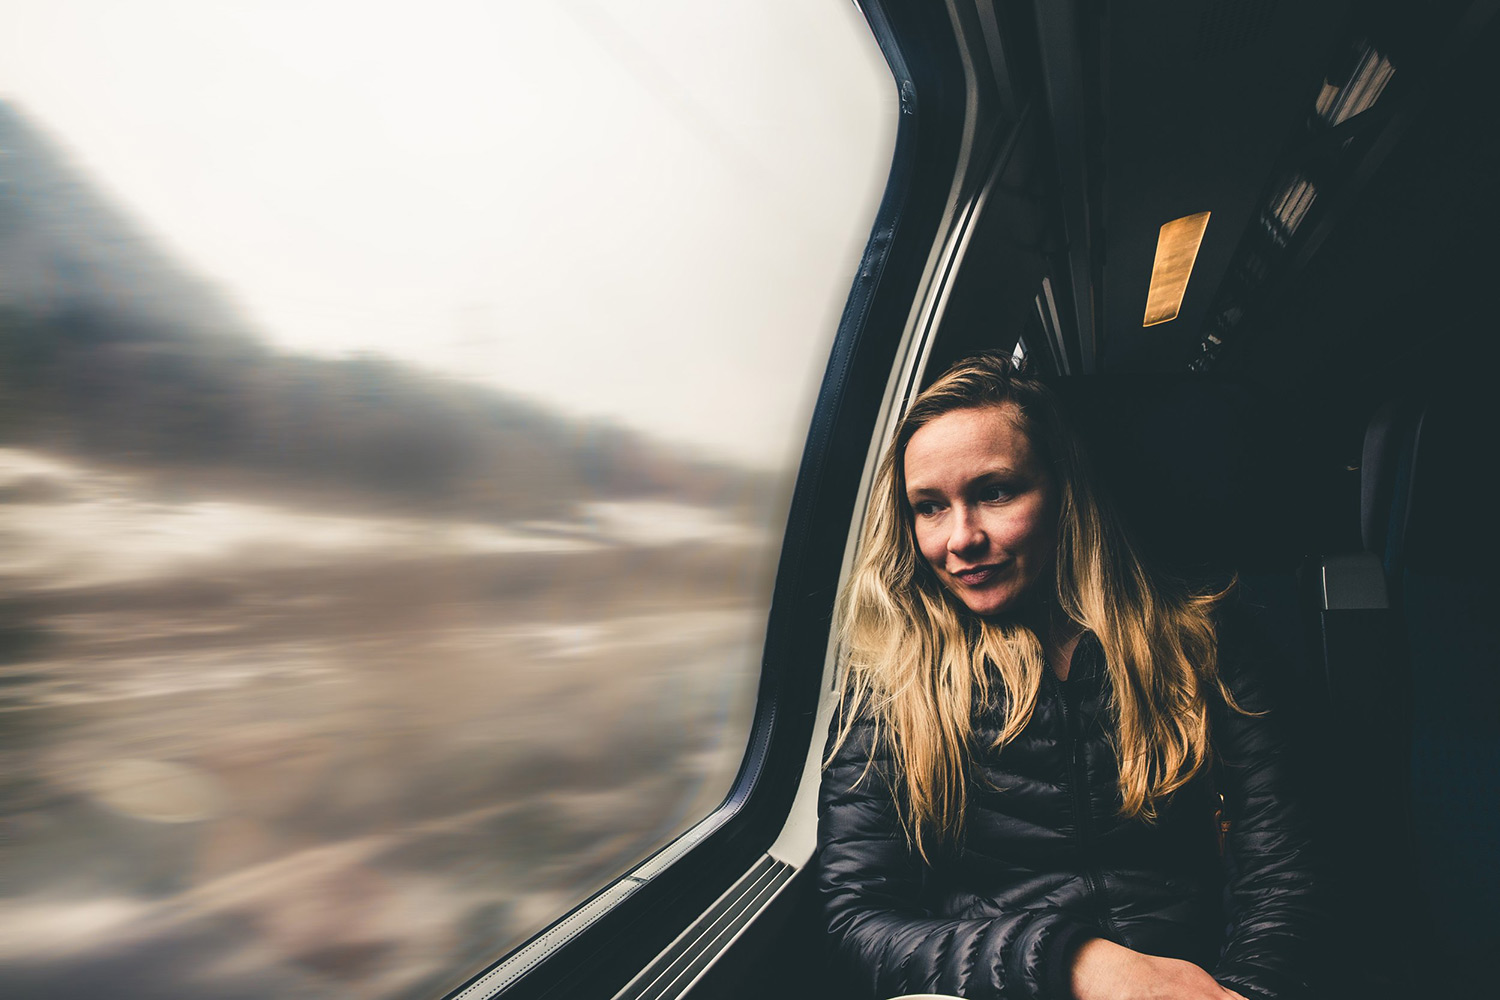 A blond woman on a train leans against the window, looking out